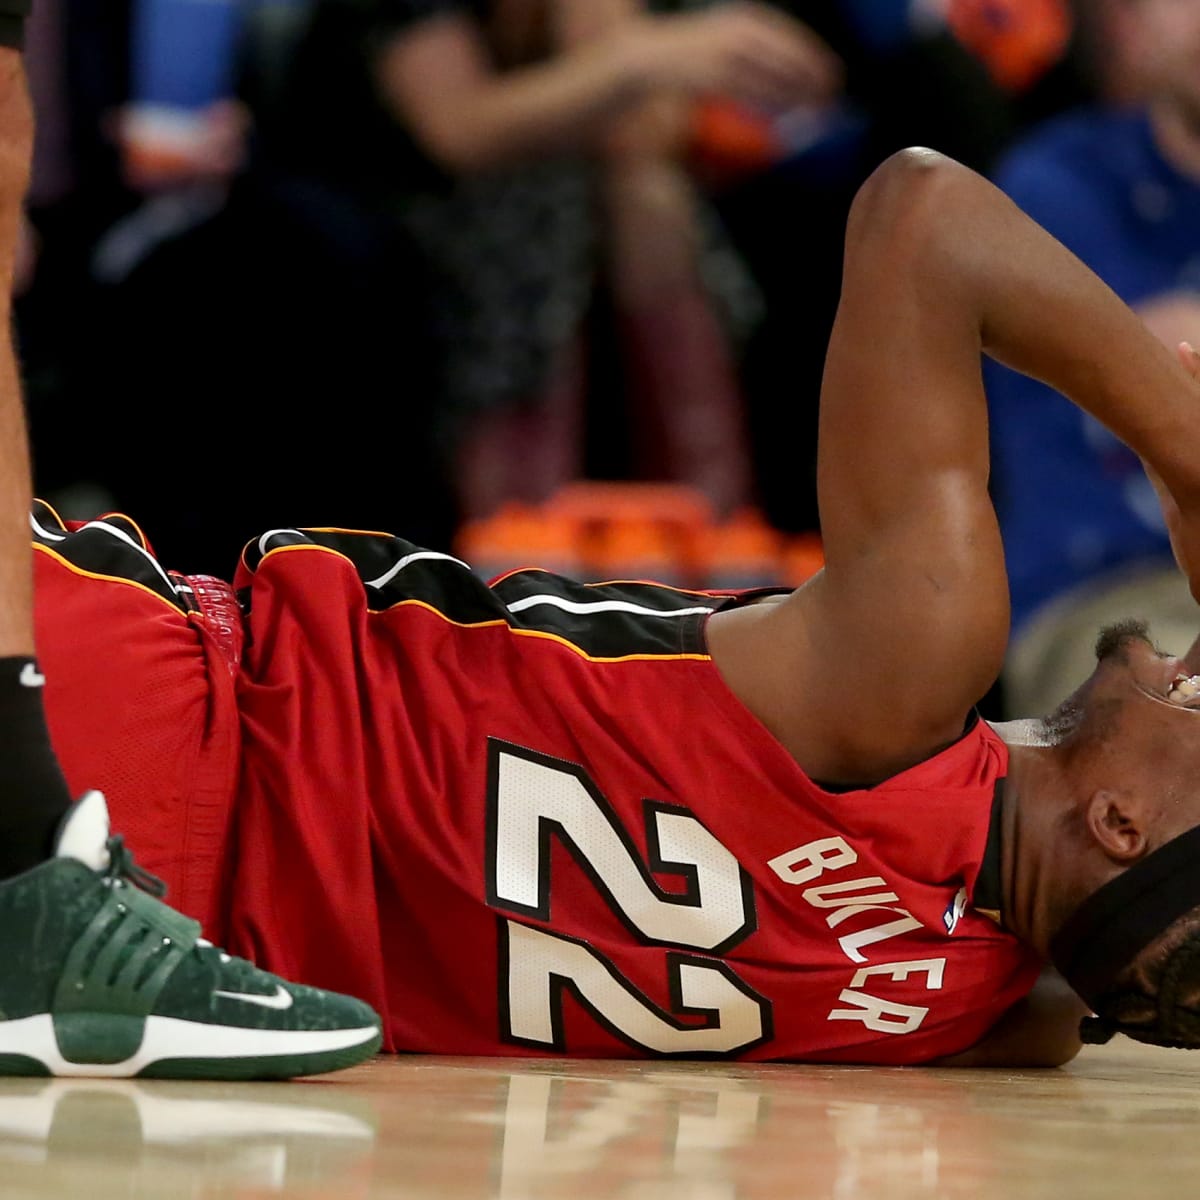 Jimmy Butler injury update: Heat star is out for Game 2 vs. Knicks with  ankle sprain